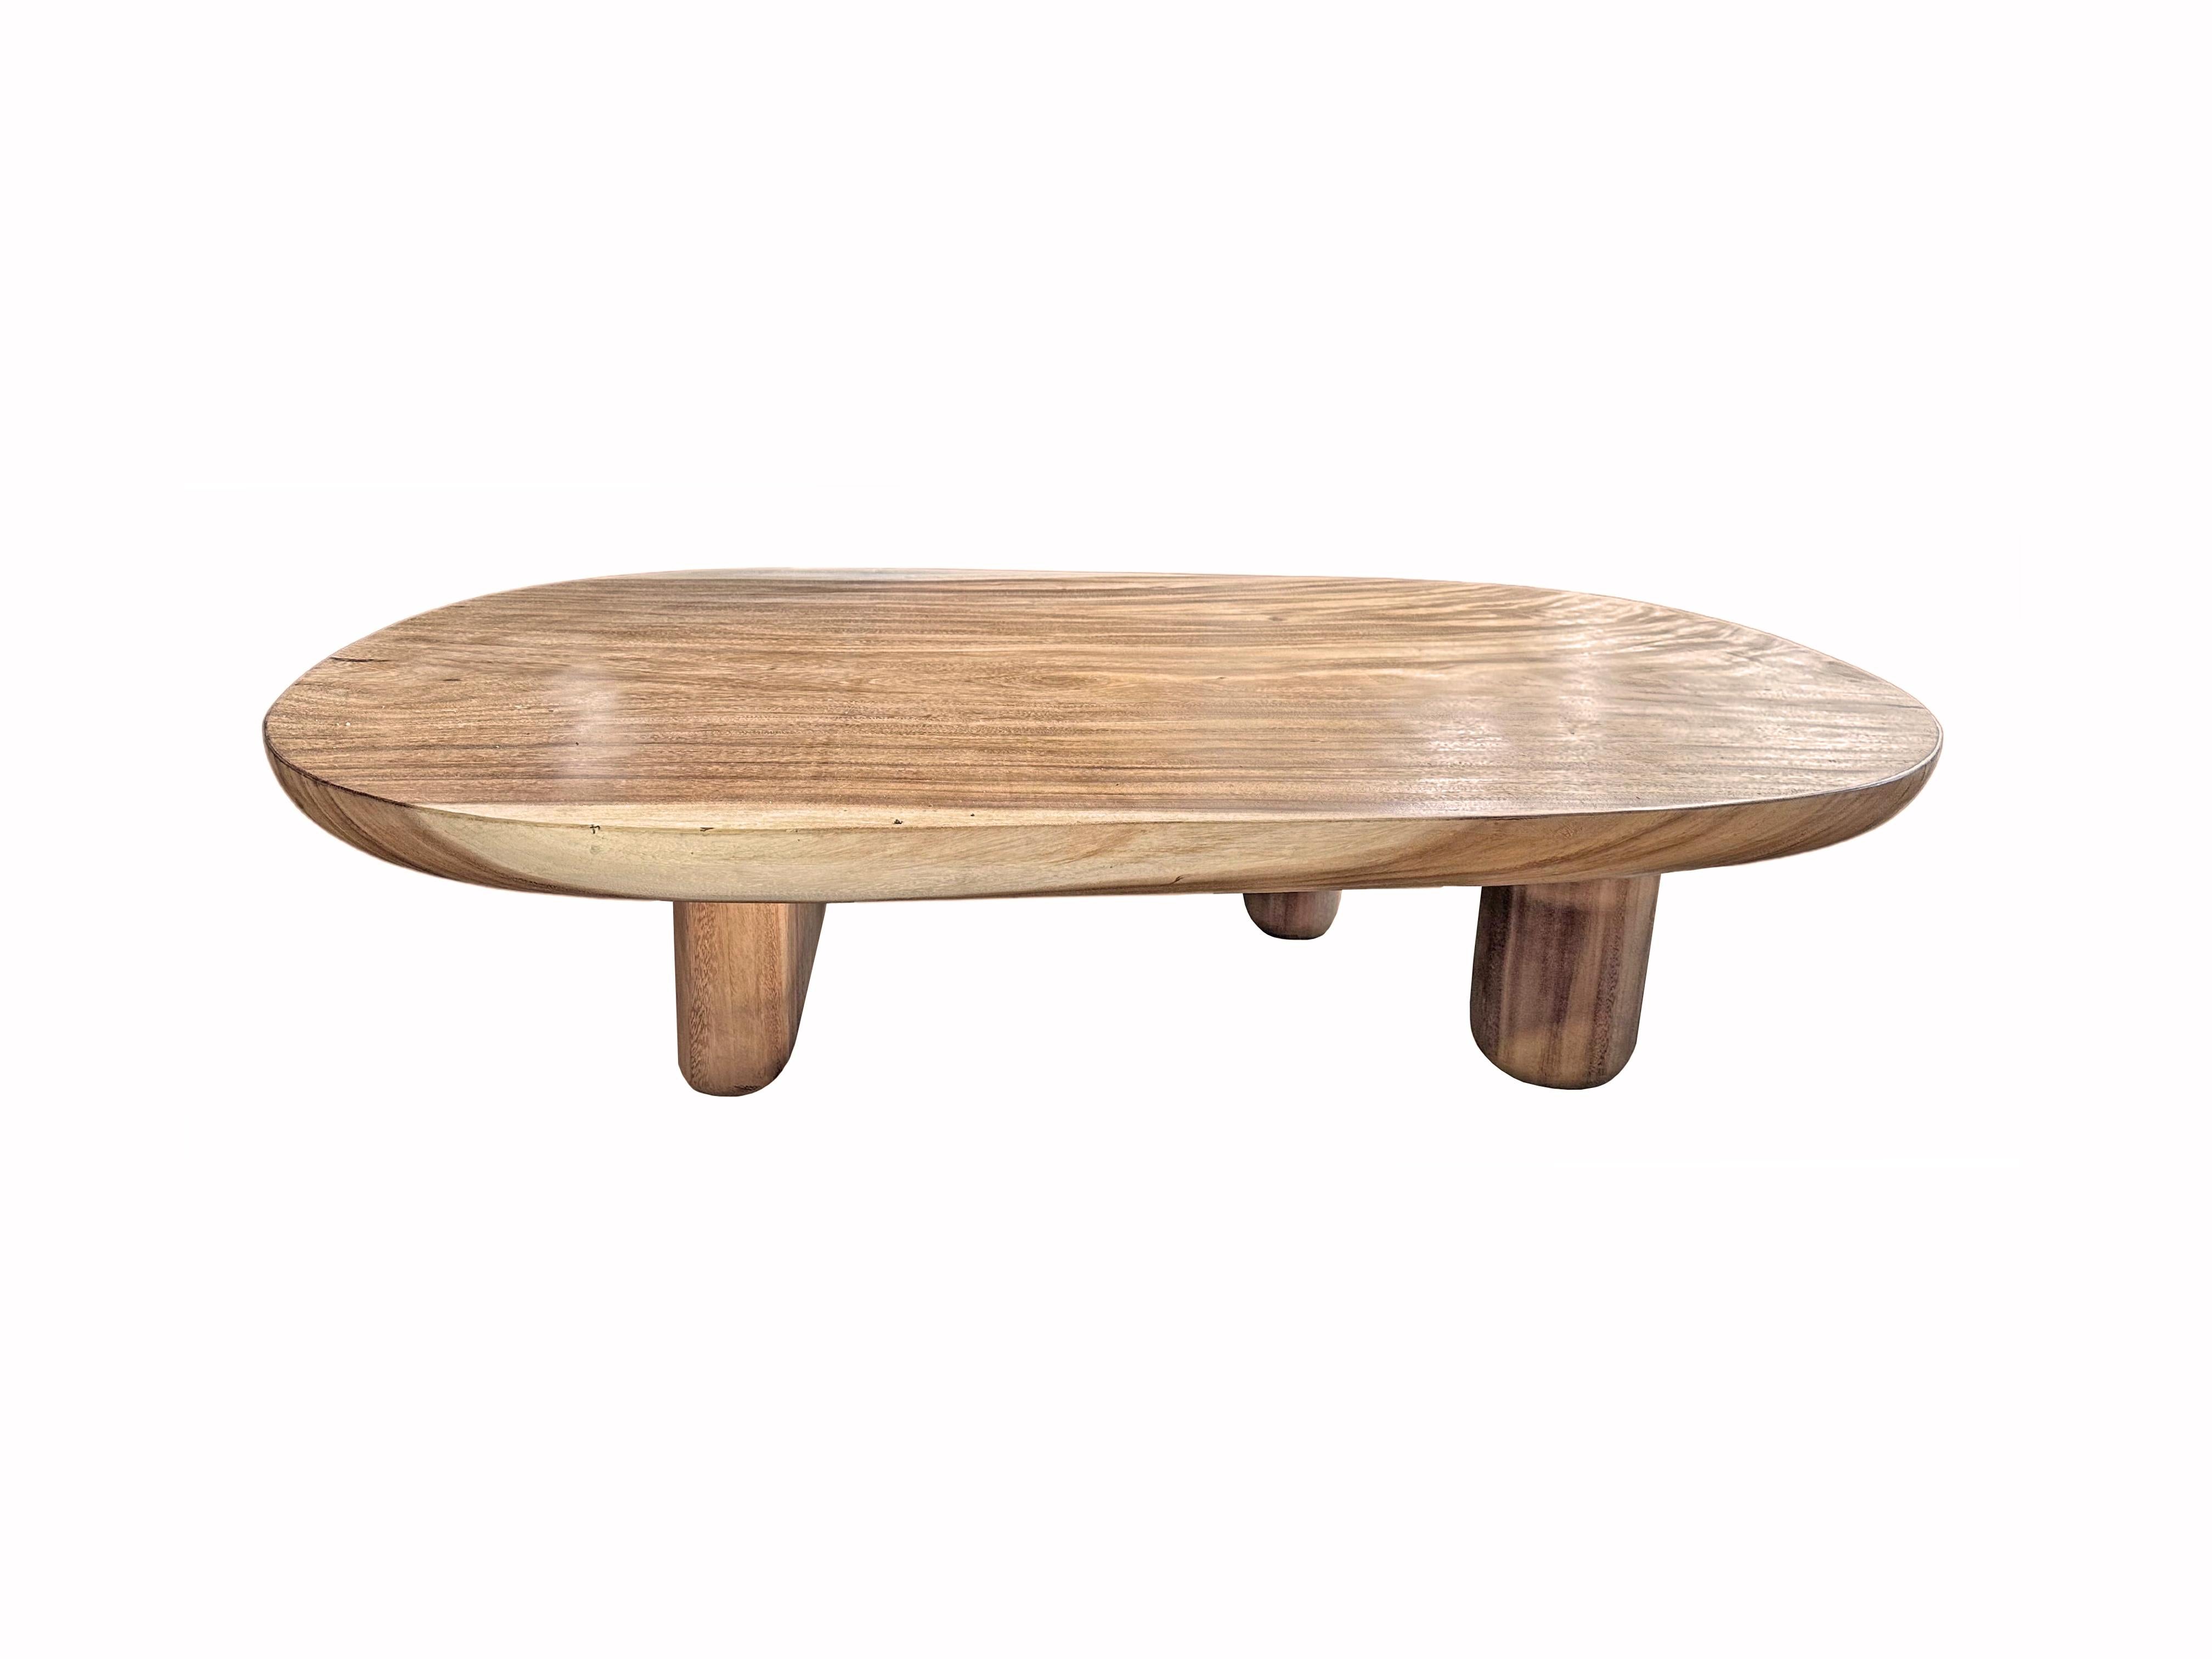 This solid mango wood table features wonderful wood textures and shades. Its neutral tones make it the perfect addition to bring warmth to any space. A sculptural and versatile piece. The mix of curved and straight lines adds to its